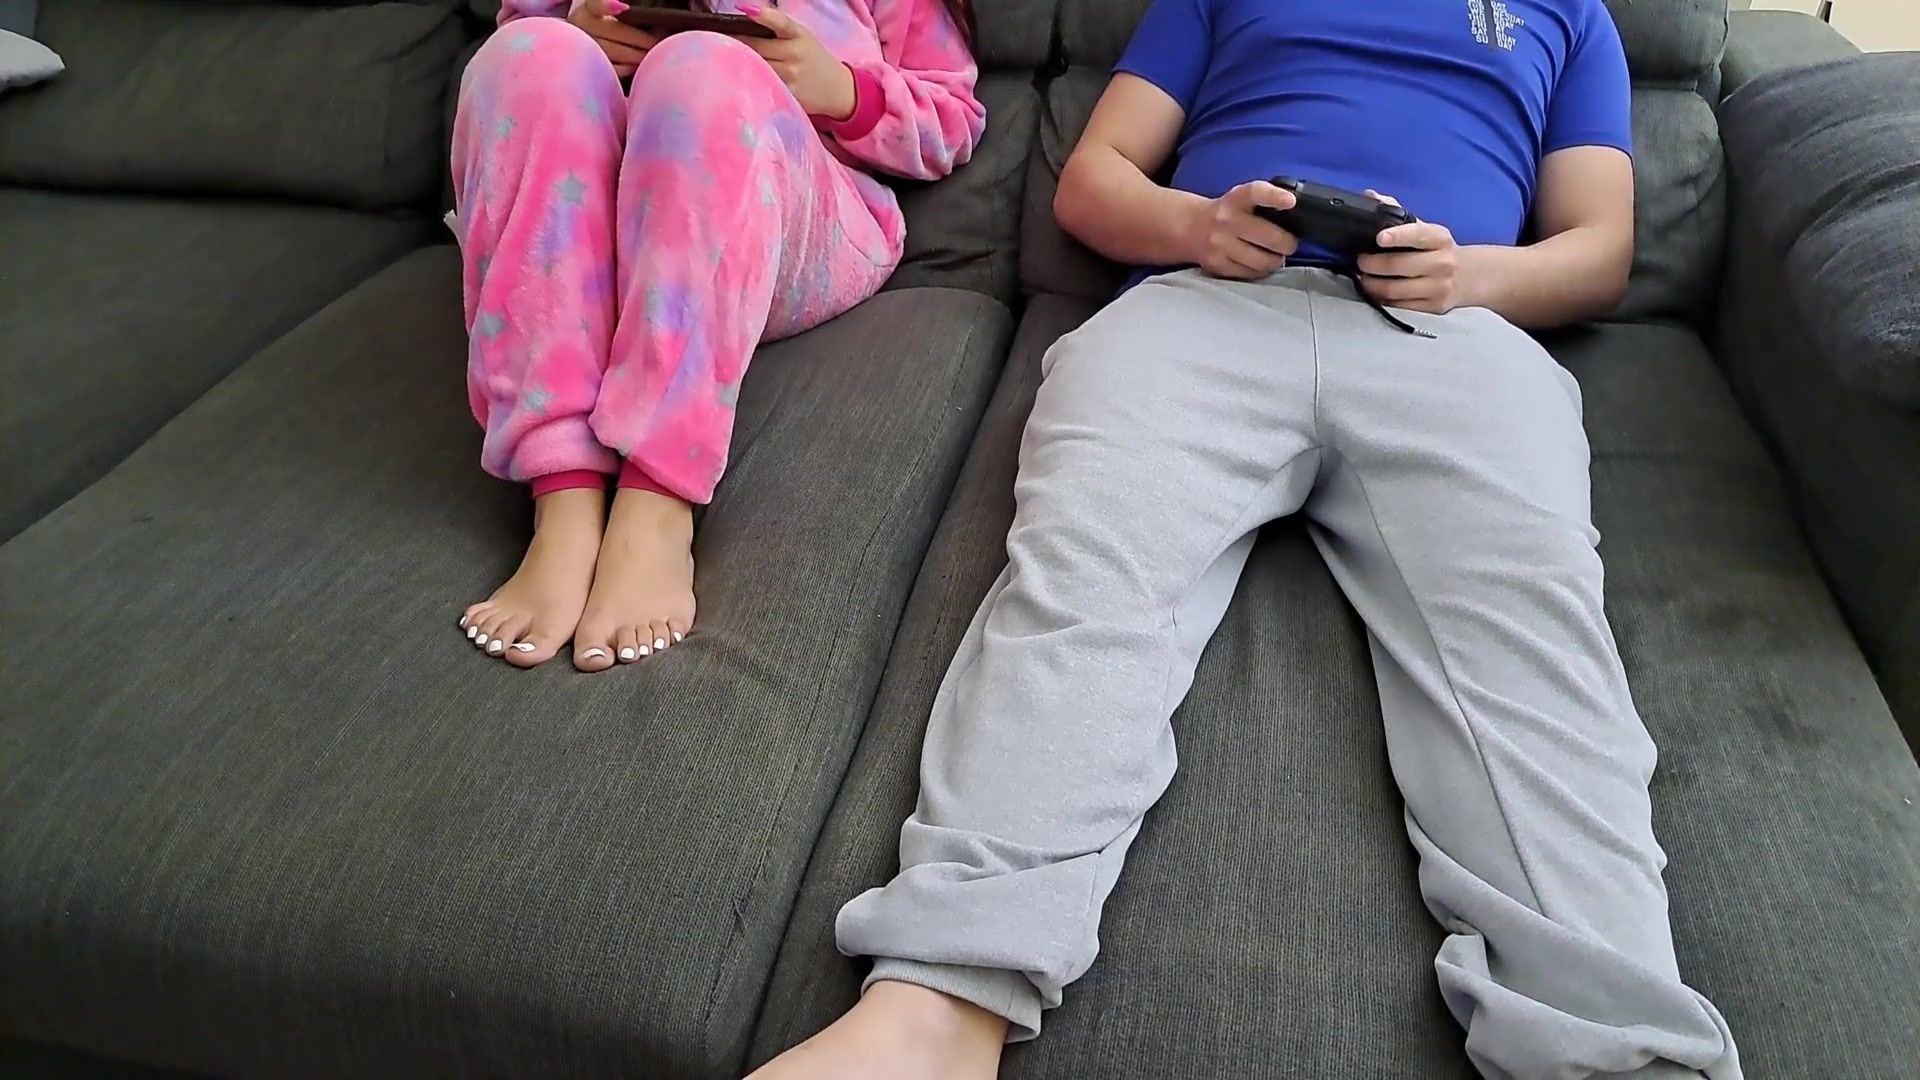 Free HD Stepsister sucks stepbrother and eats his sperm while he plays video games Porn Video